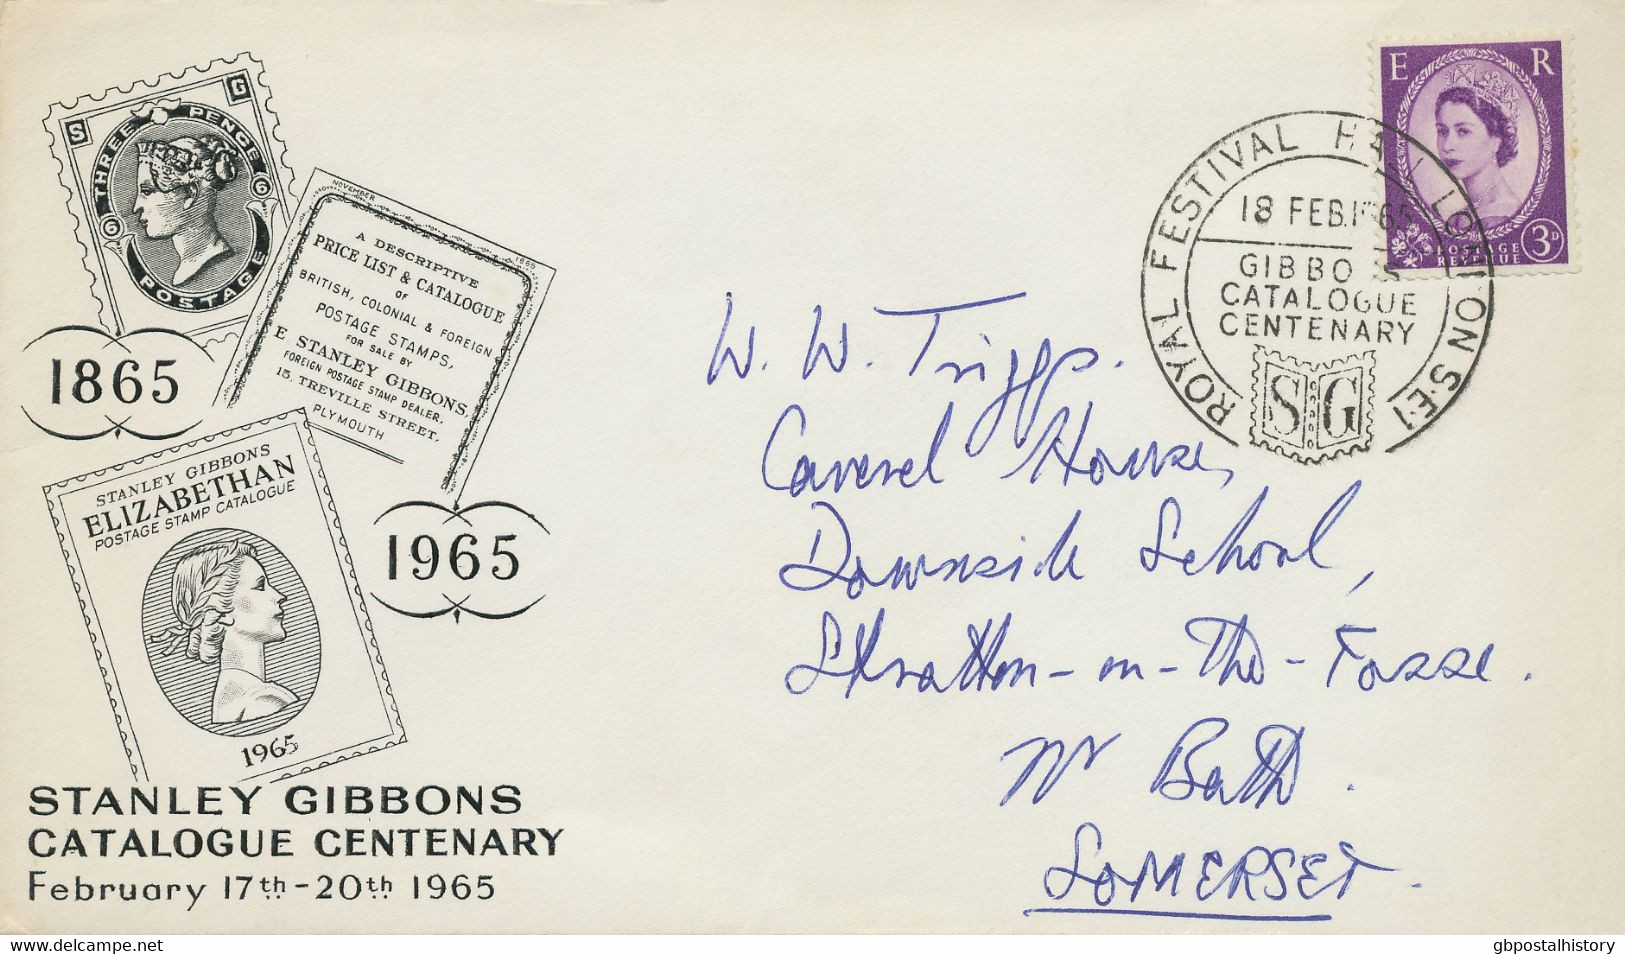 GB SPECIAL EVENT POSTMARK 1965 ROYAL FESTIVAL HALL LONDON S.E.1 GIBBONS CATALOGUE CENTENARY - Lettres & Documents